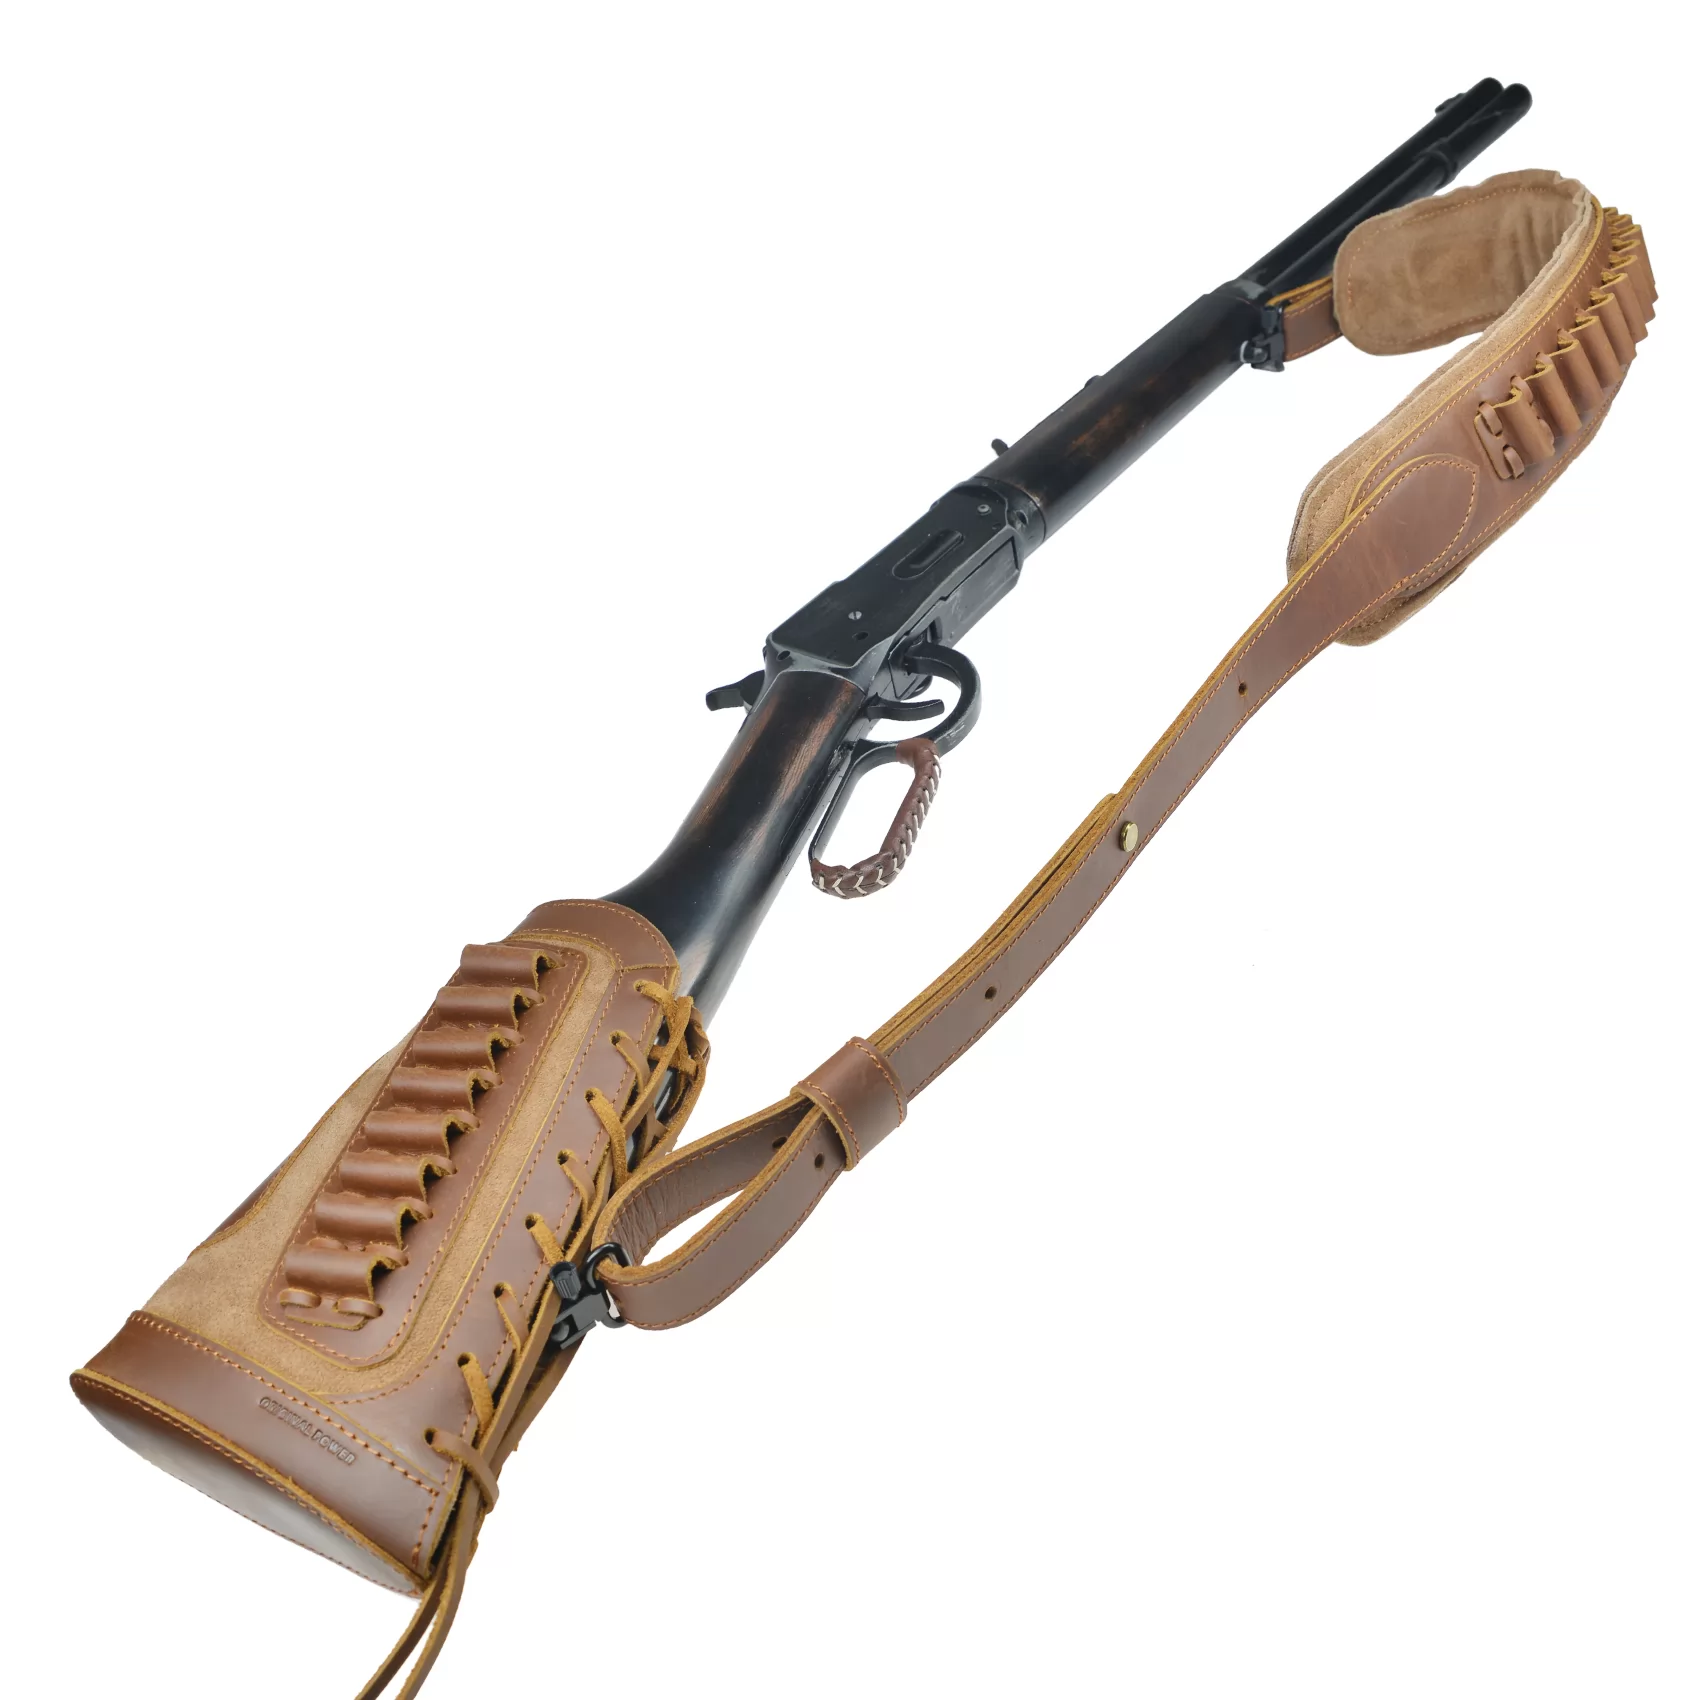 OP ORIGINAL POWER Leather Rifle Buttstock cheek rest with Matched Rifle Sling for.22 .357.30-30 .30-06 .30-30.45-70 12GA